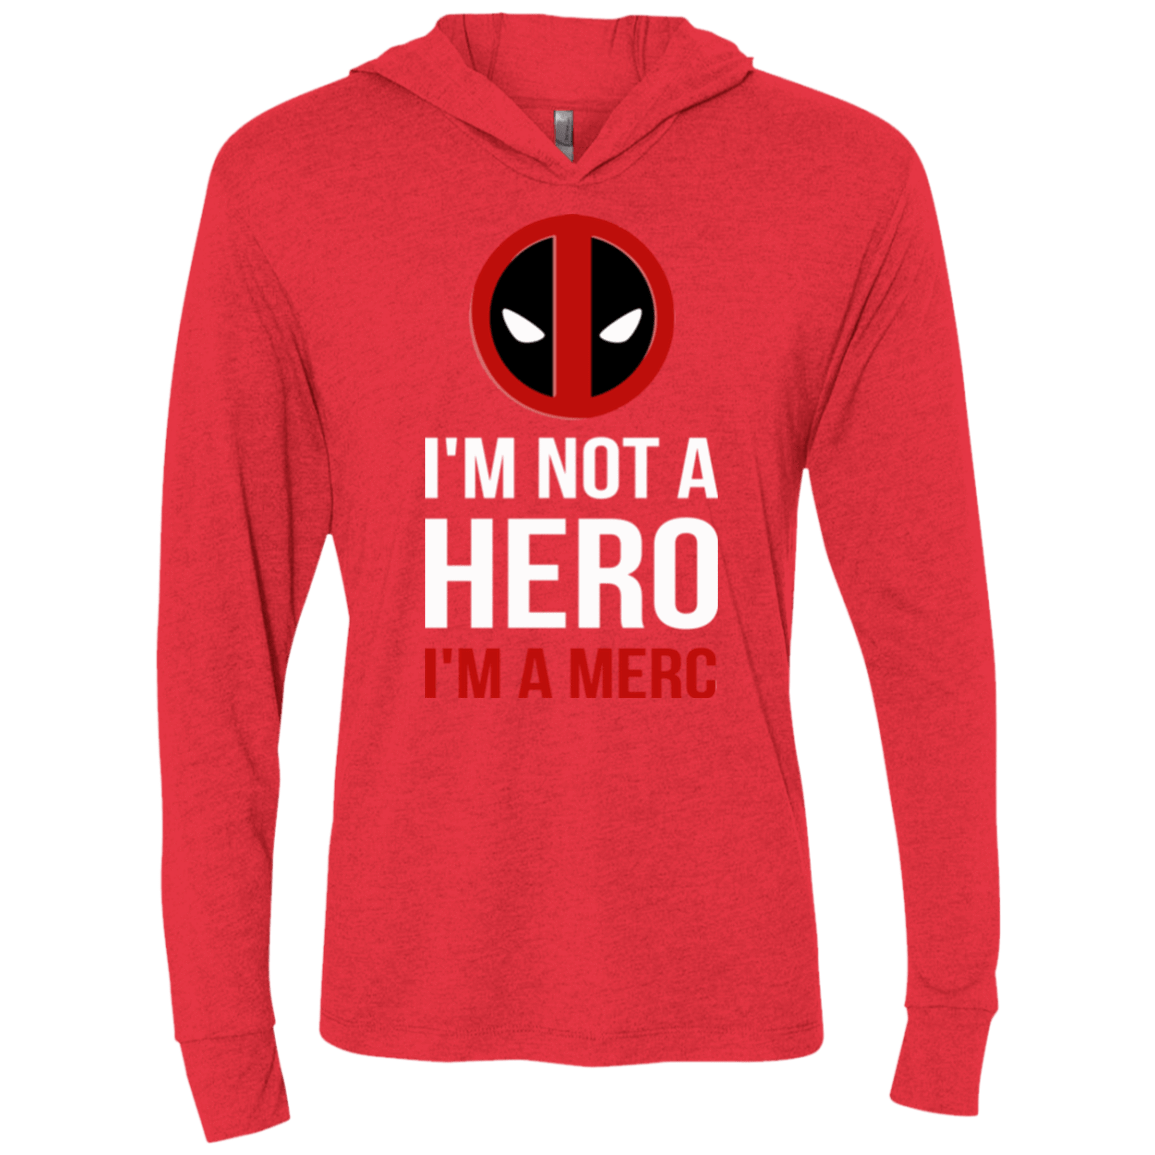 T-Shirts Vintage Red / X-Small I'm a merc Triblend Long Sleeve Hoodie Tee